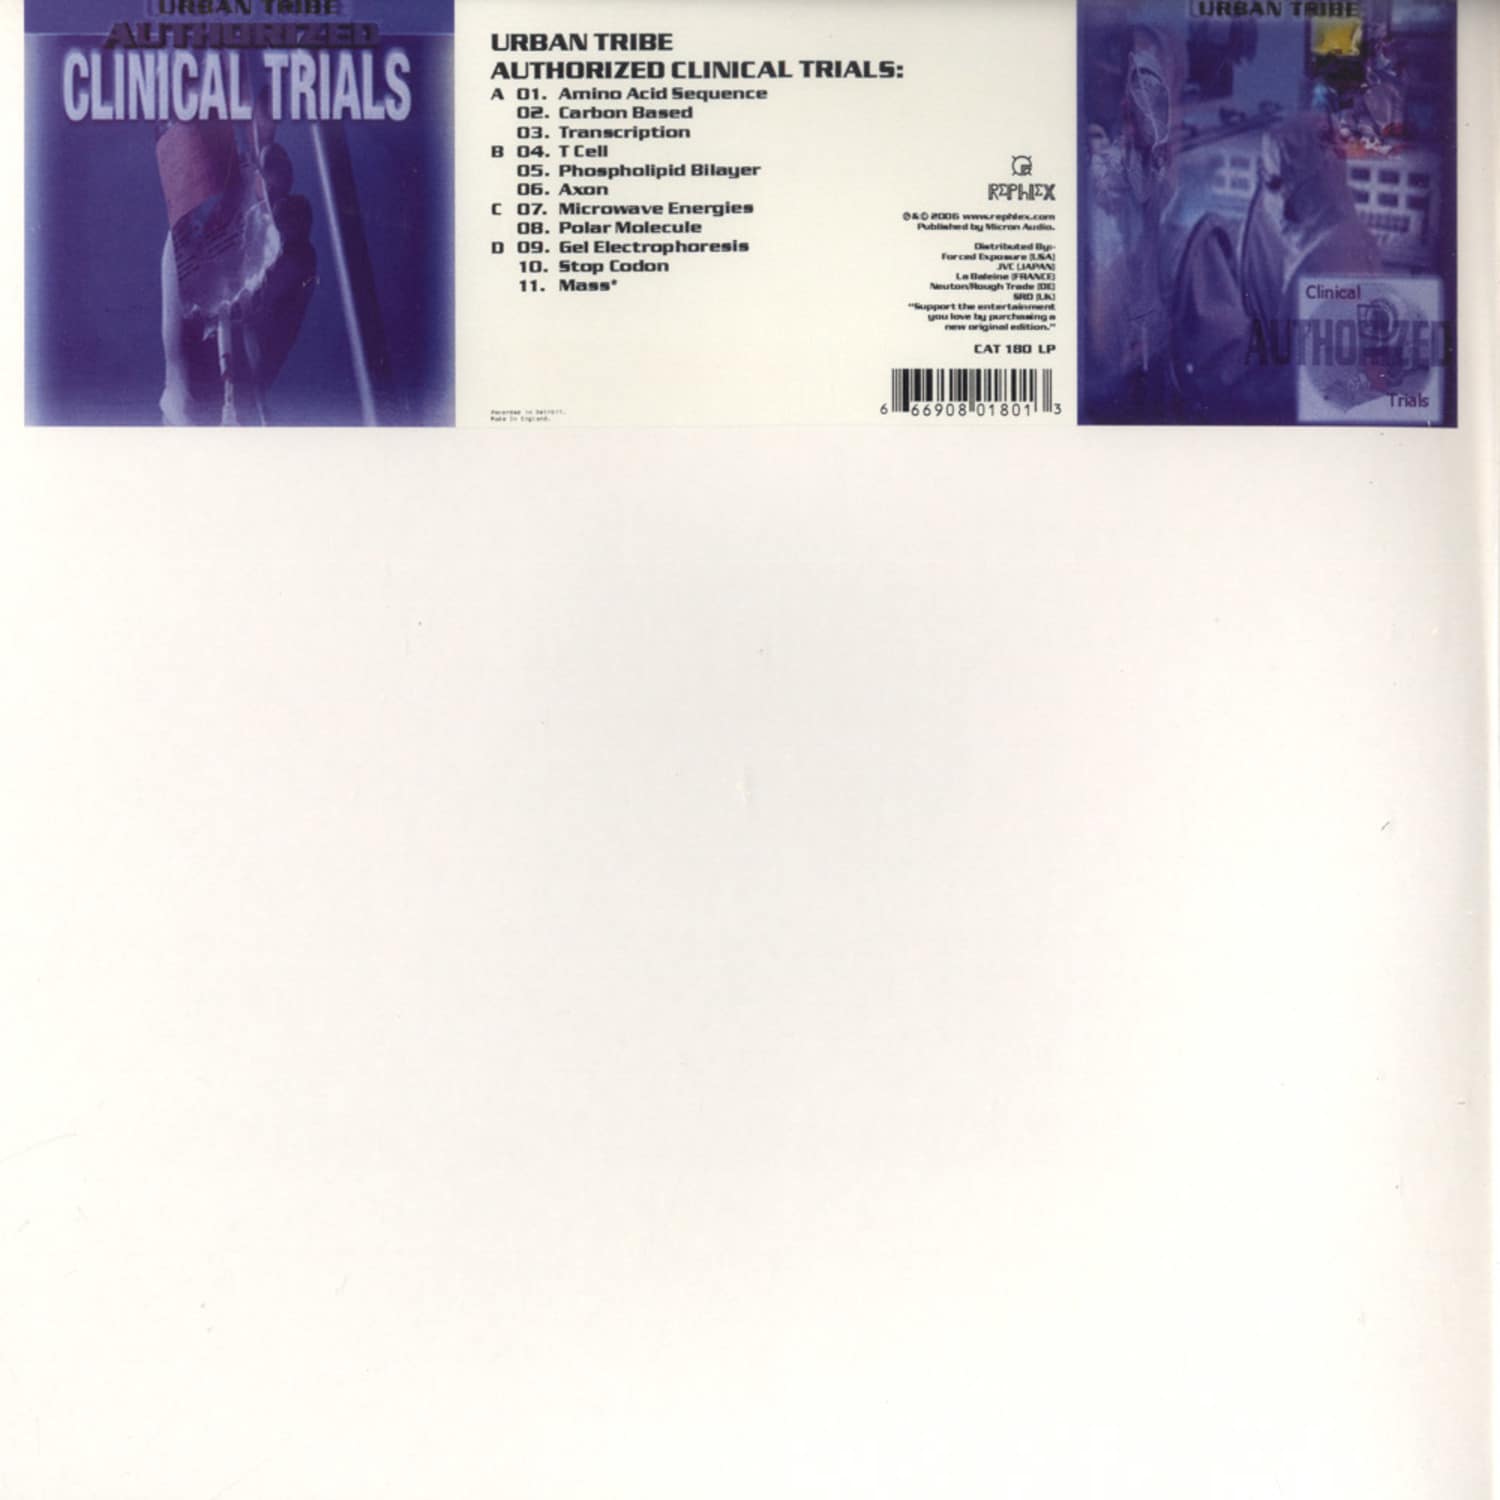 Urban Tribe - AUTHORIZED CLINICAL TRIALS 